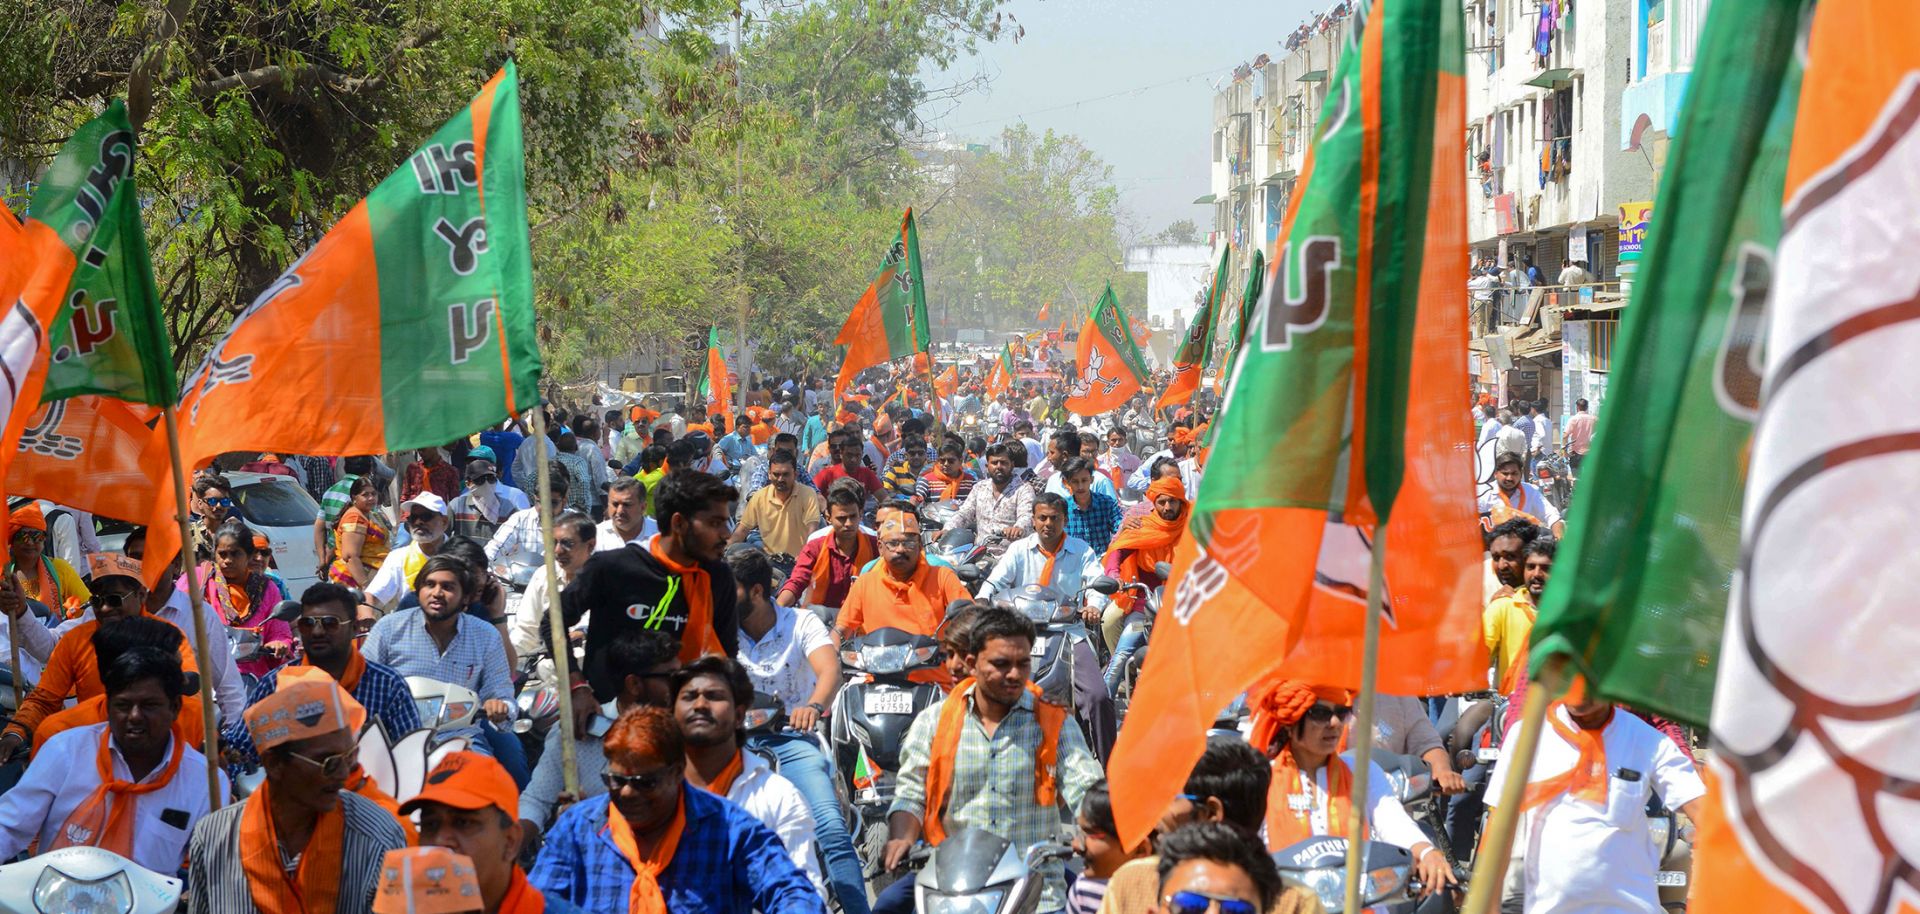 Bharatiya Janata Party supporters gather to follow national party President Amit Shah on April 6, 2019, in the Indian city of Ahmedabad.